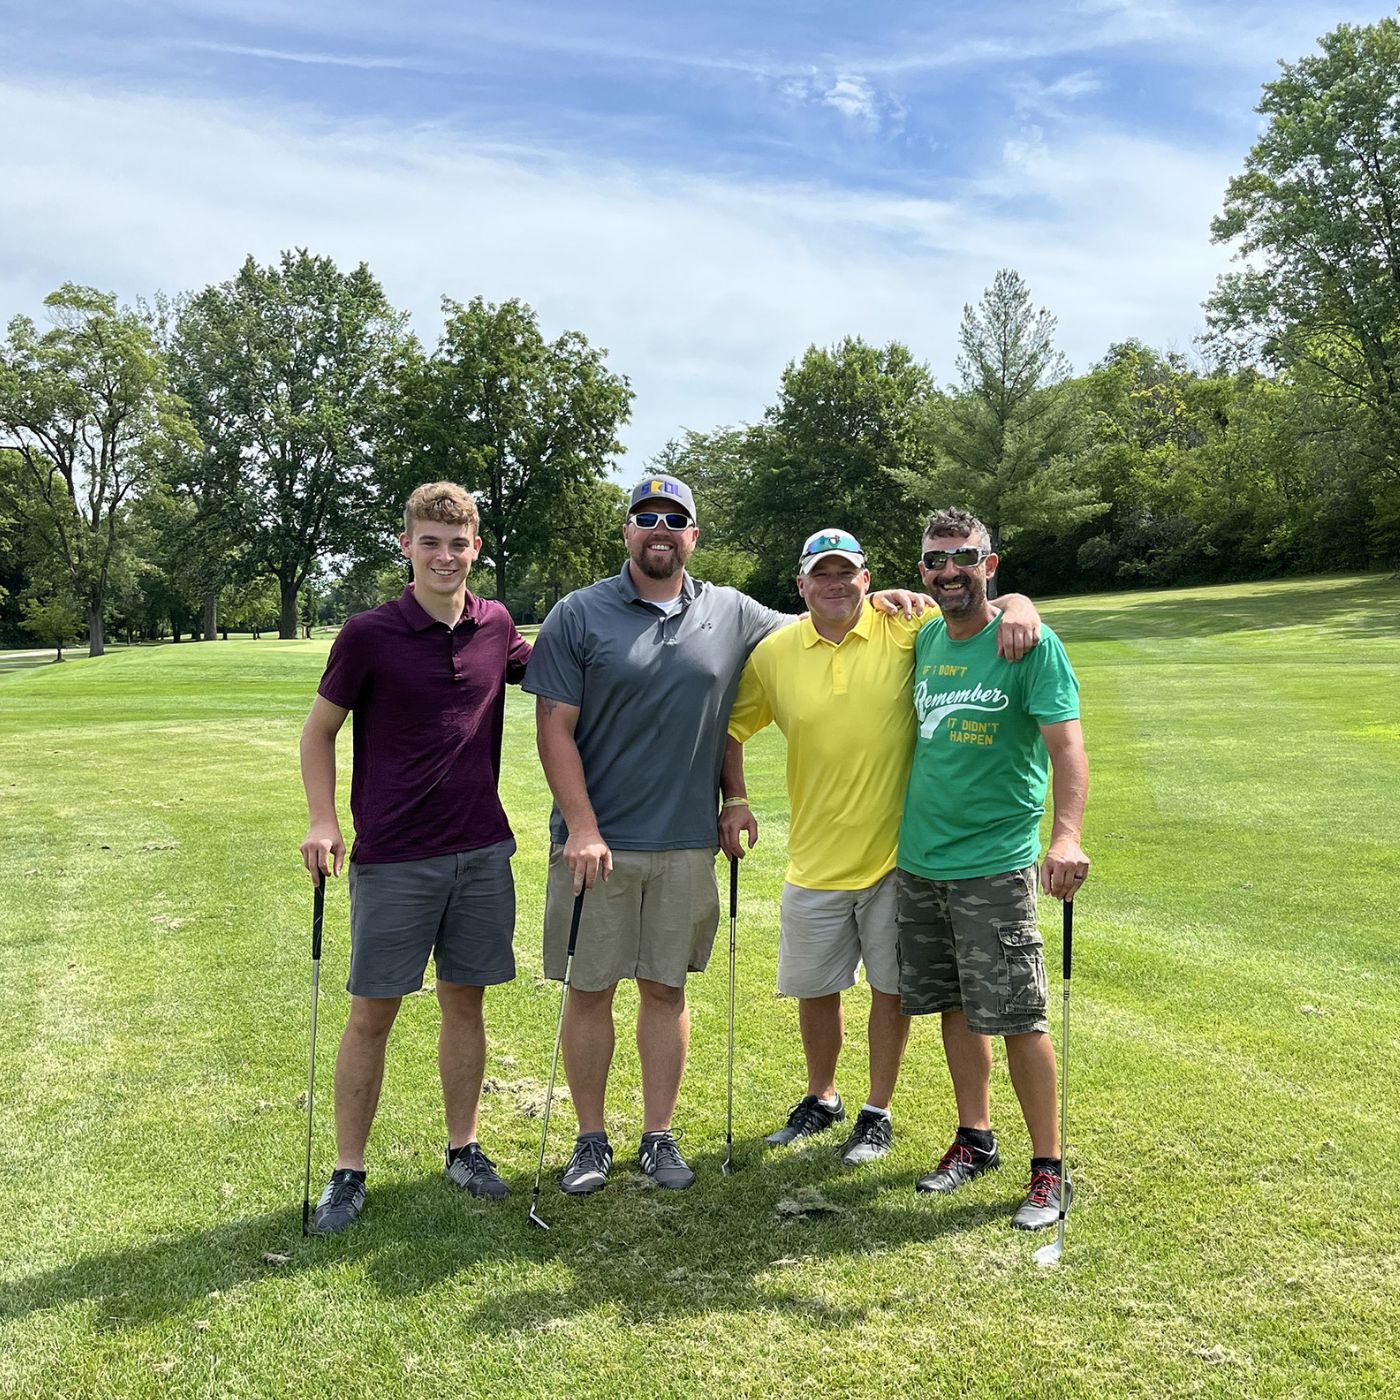 Laborers' 177 Cup Annual Charity Golf Classic